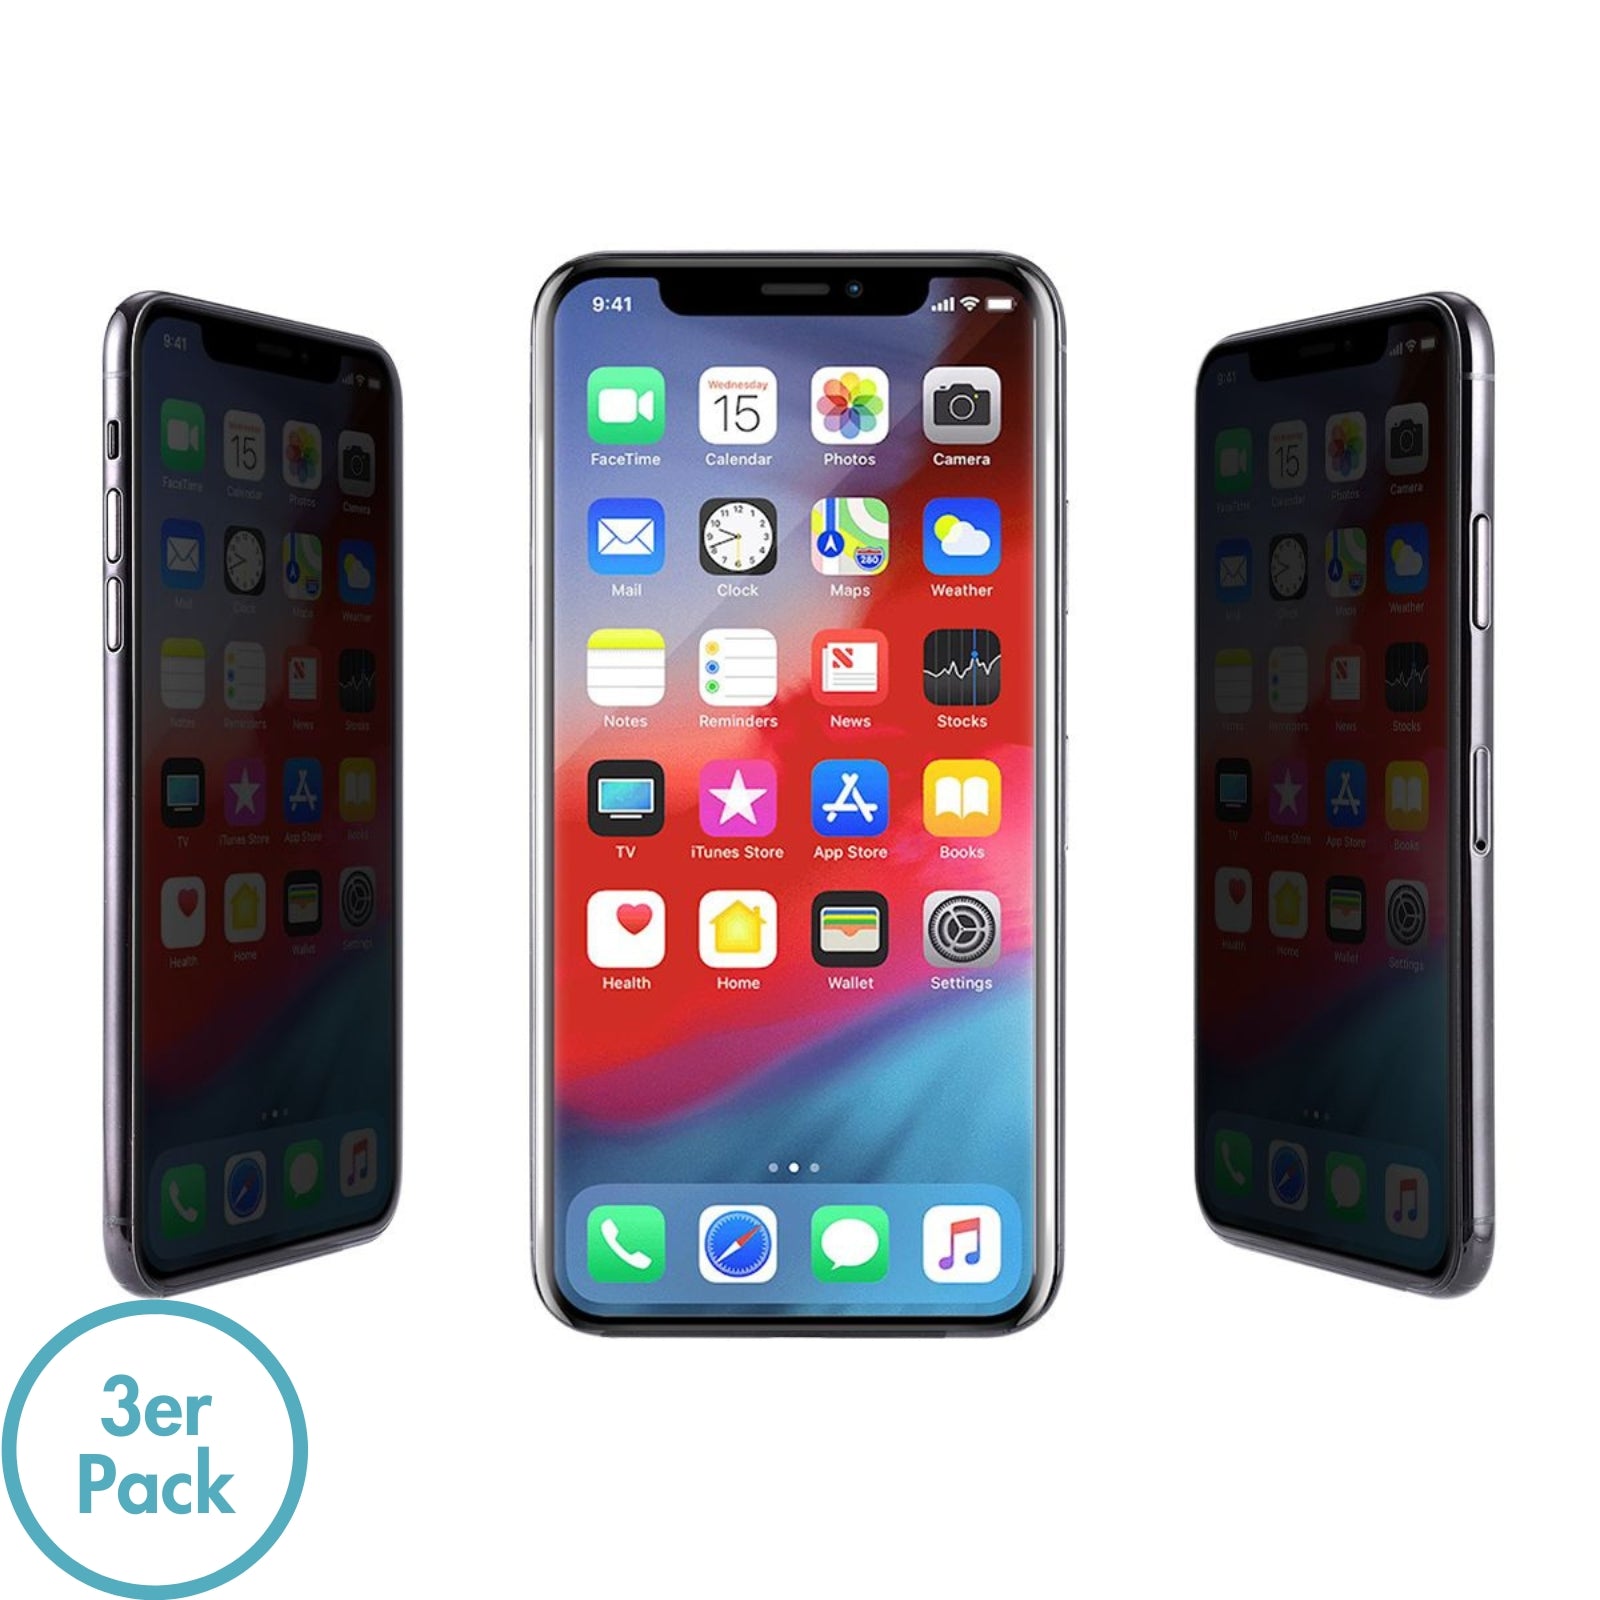 MonkeyTEC Pack of 3 privacy film Apple iPhone with attachment aid H9 screen protector privacy screen TF-03